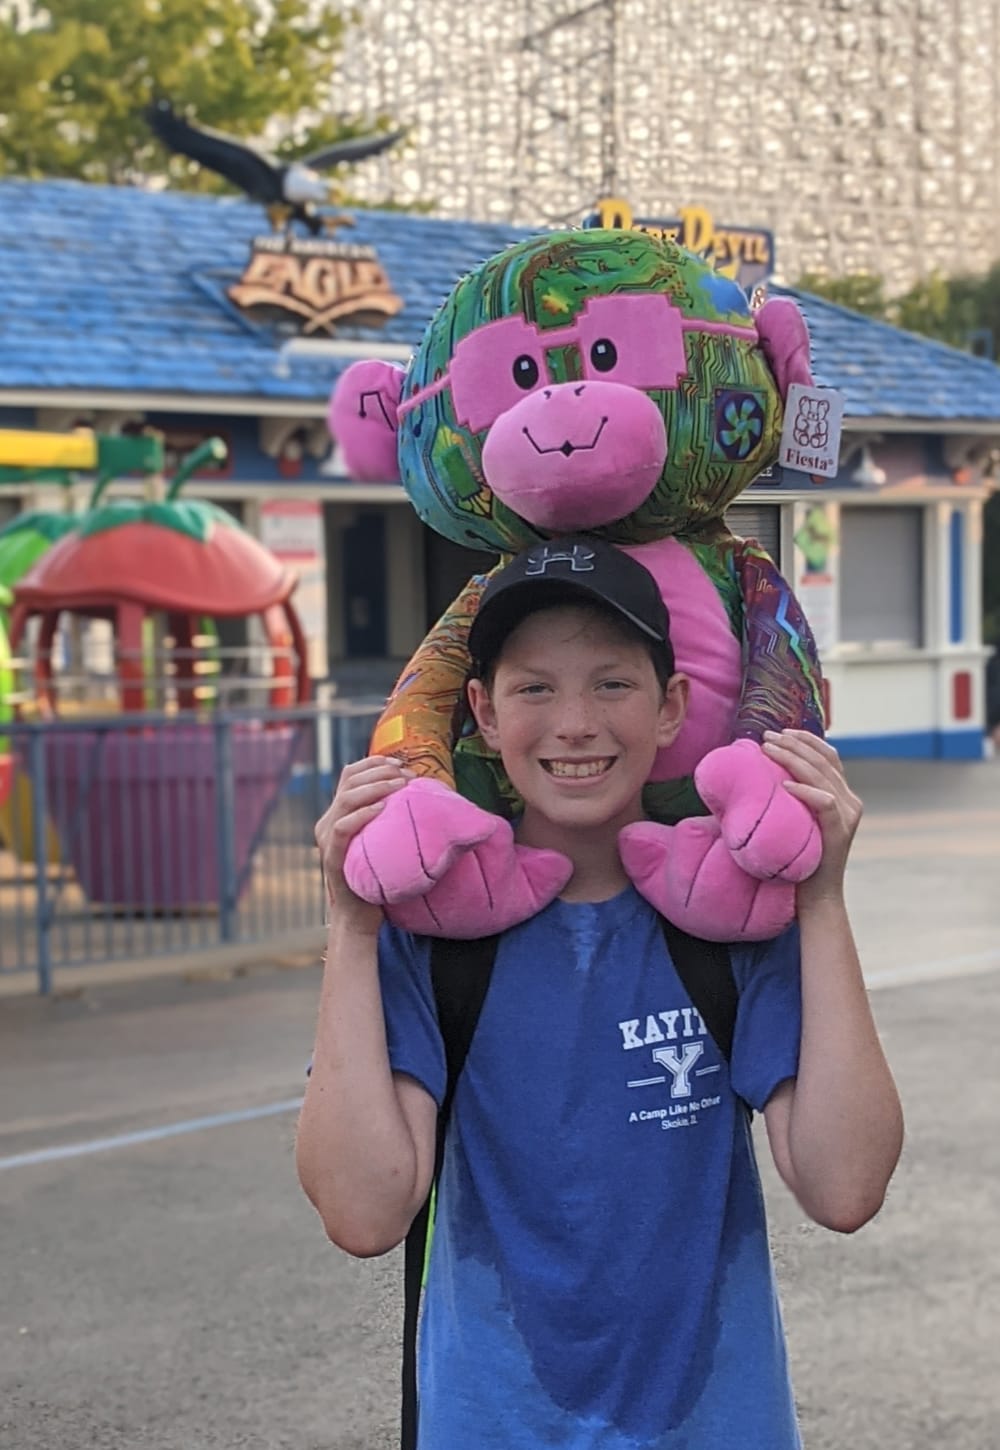 camper at a theme park with a teddy bear